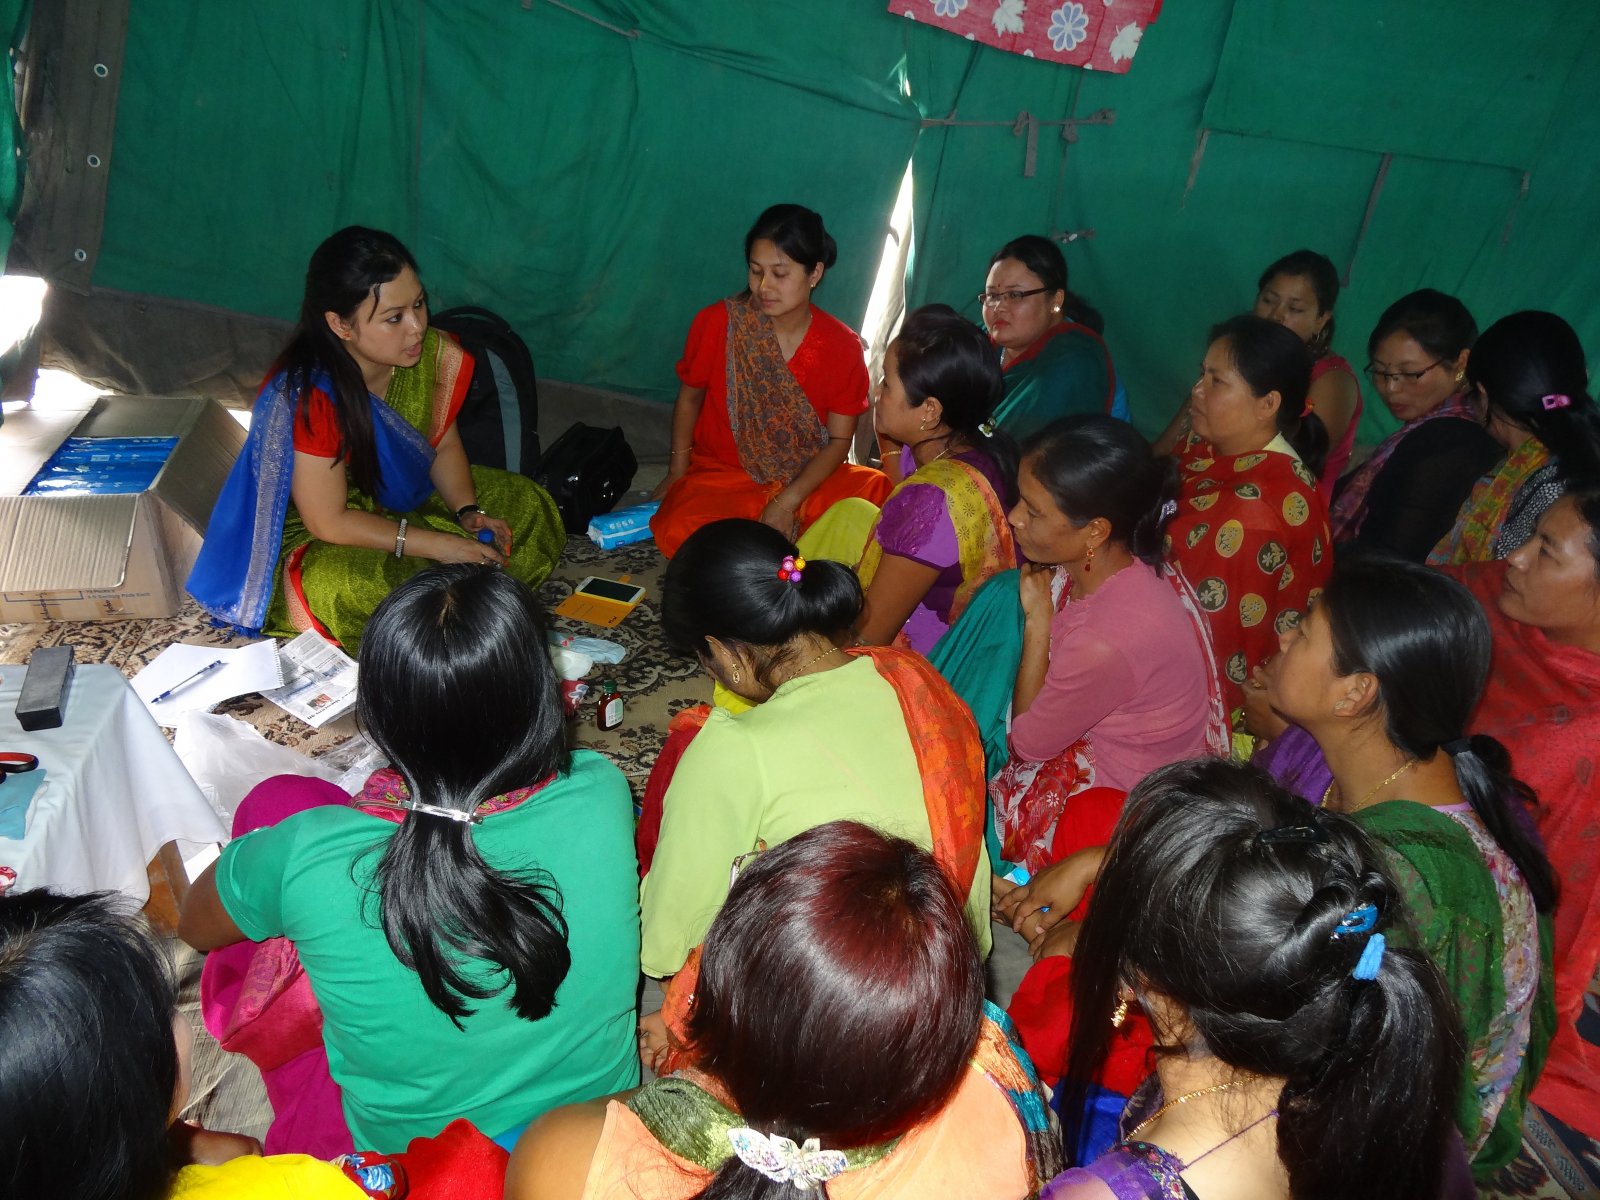 Women throng to my trainings and pose their concerns. Technology and its use simplifies trainings and leaves a better understanding among participants.